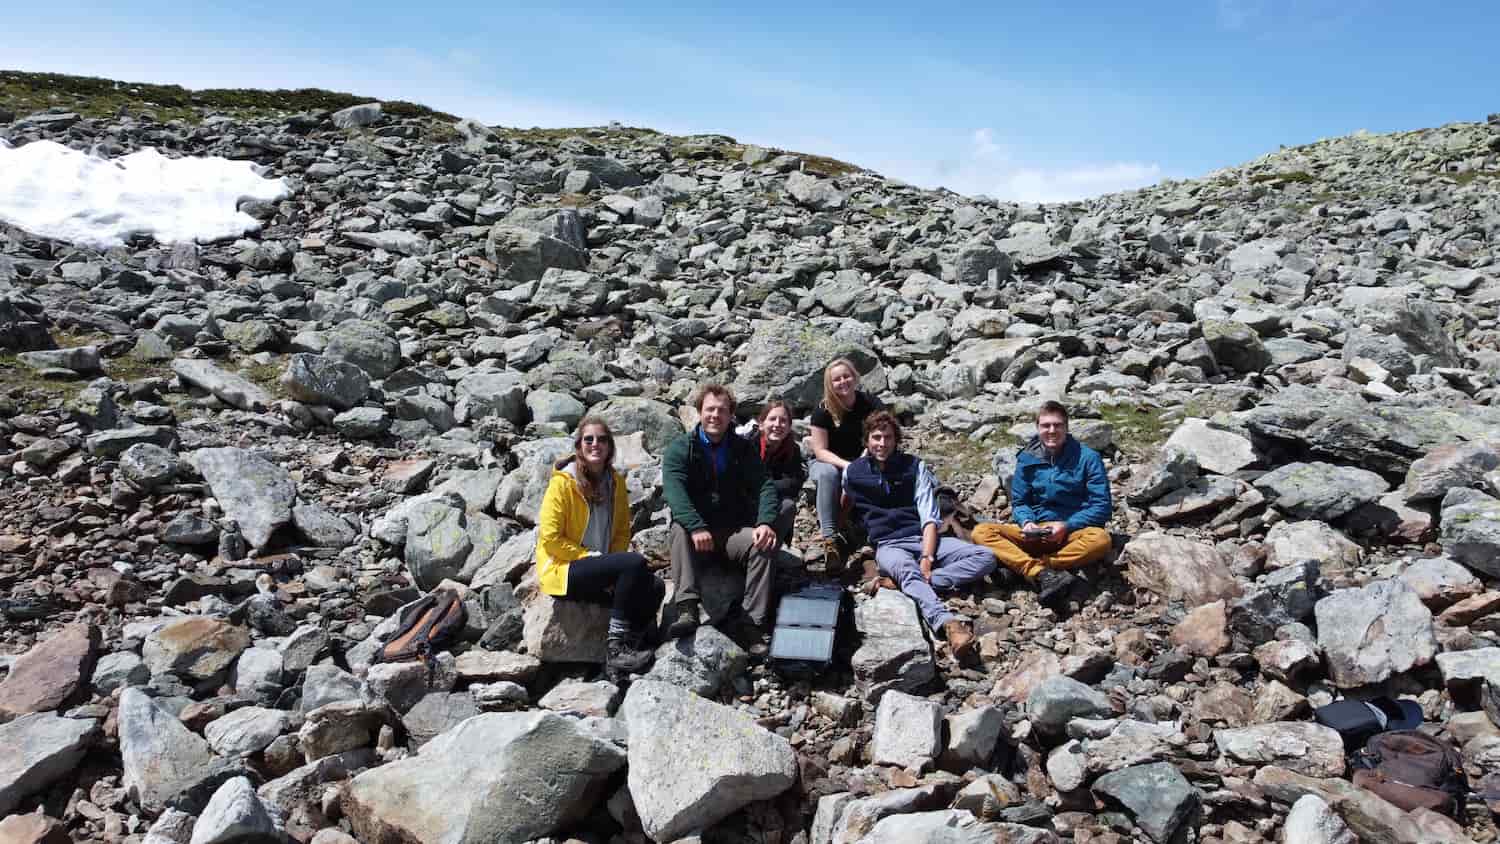 group photo of tourists on a sunny rocky mountain with a hiking solar panels